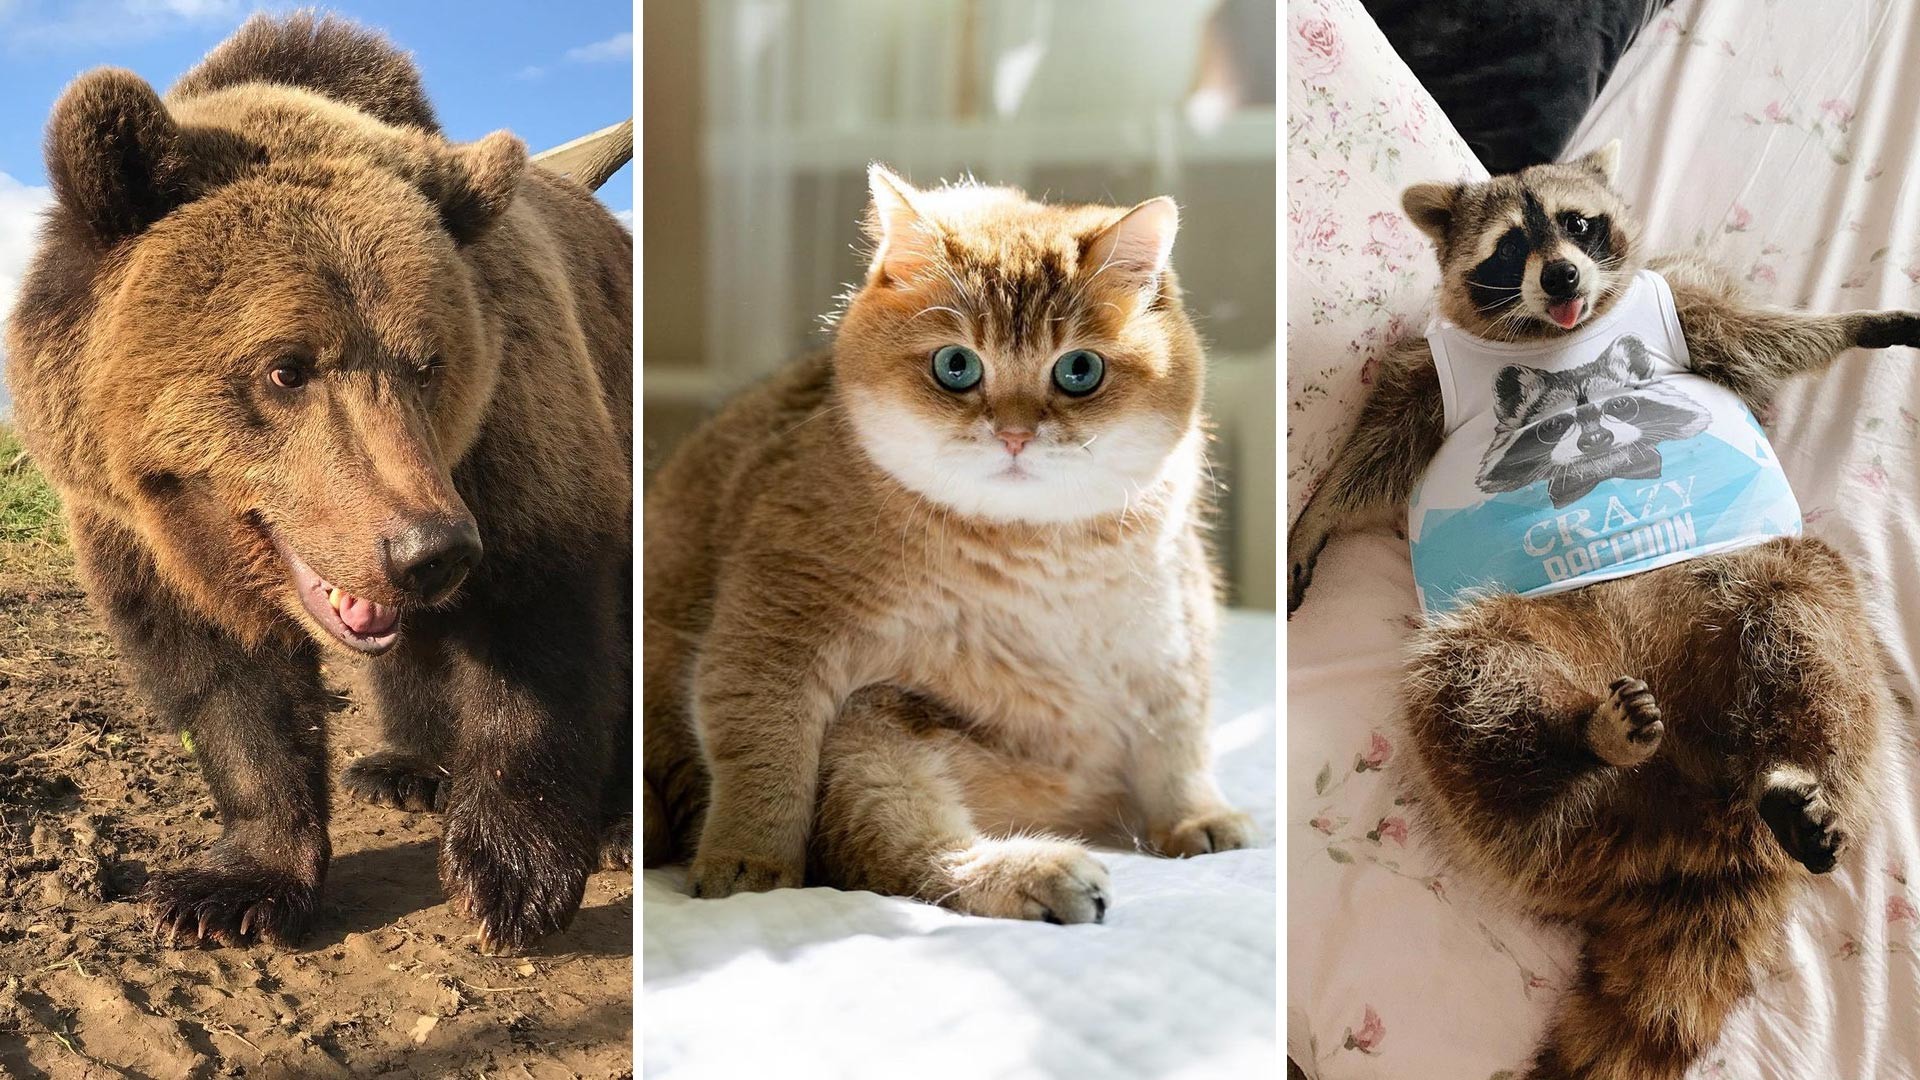 10 Russian animals you to follow on Instagram! - Russia Beyond